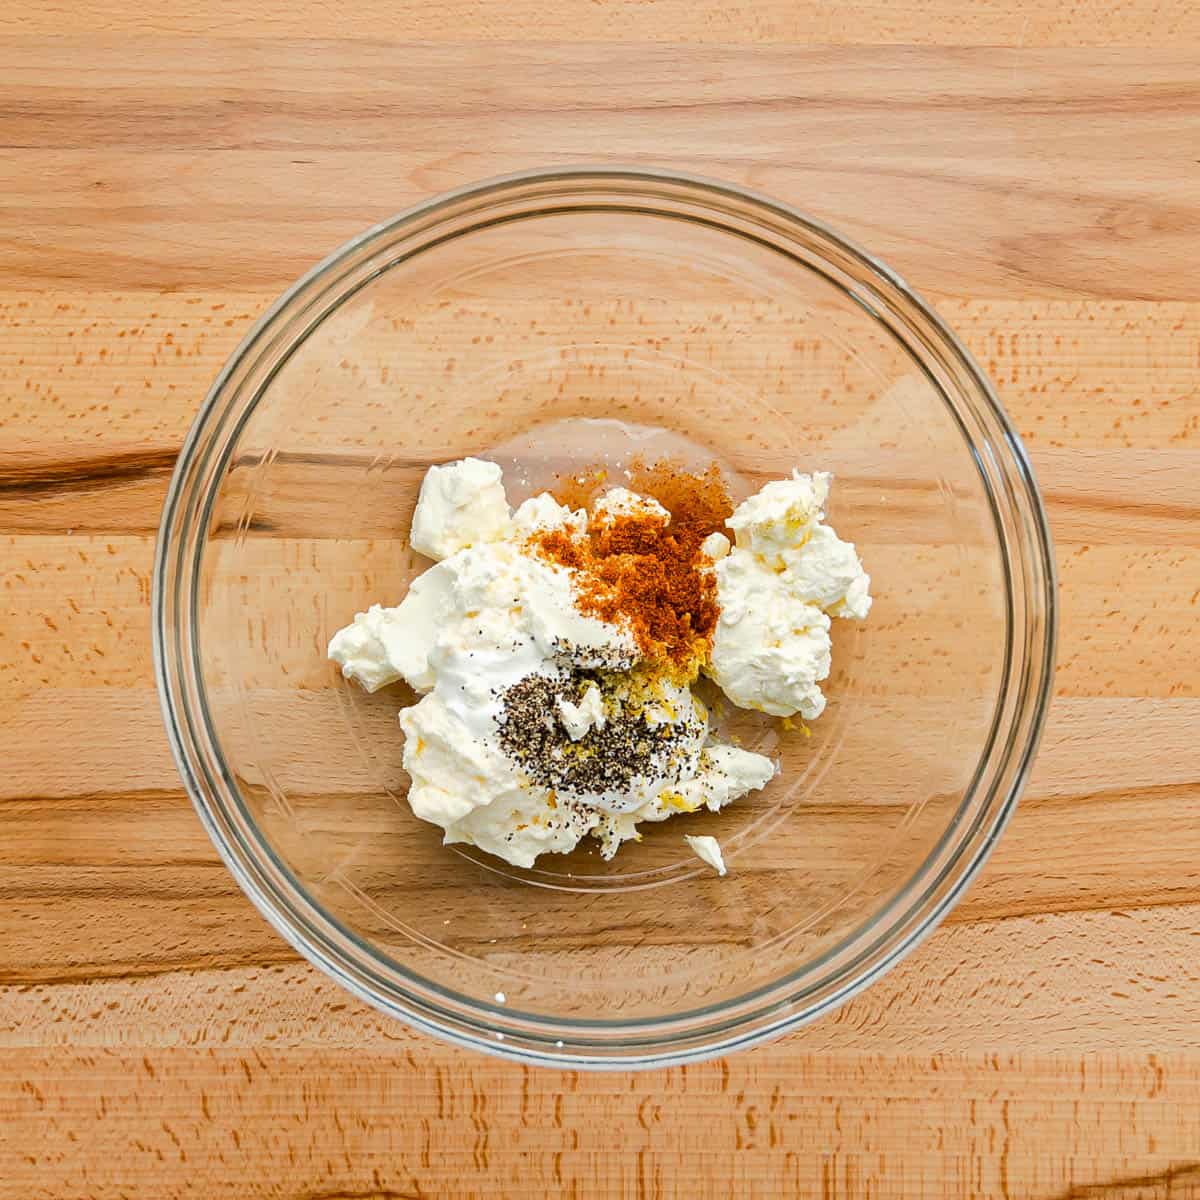 In a bowl, combine the cream cheese, mayo, sour cream, salt, black pepper, and Old Bay seasoning until smooth. 